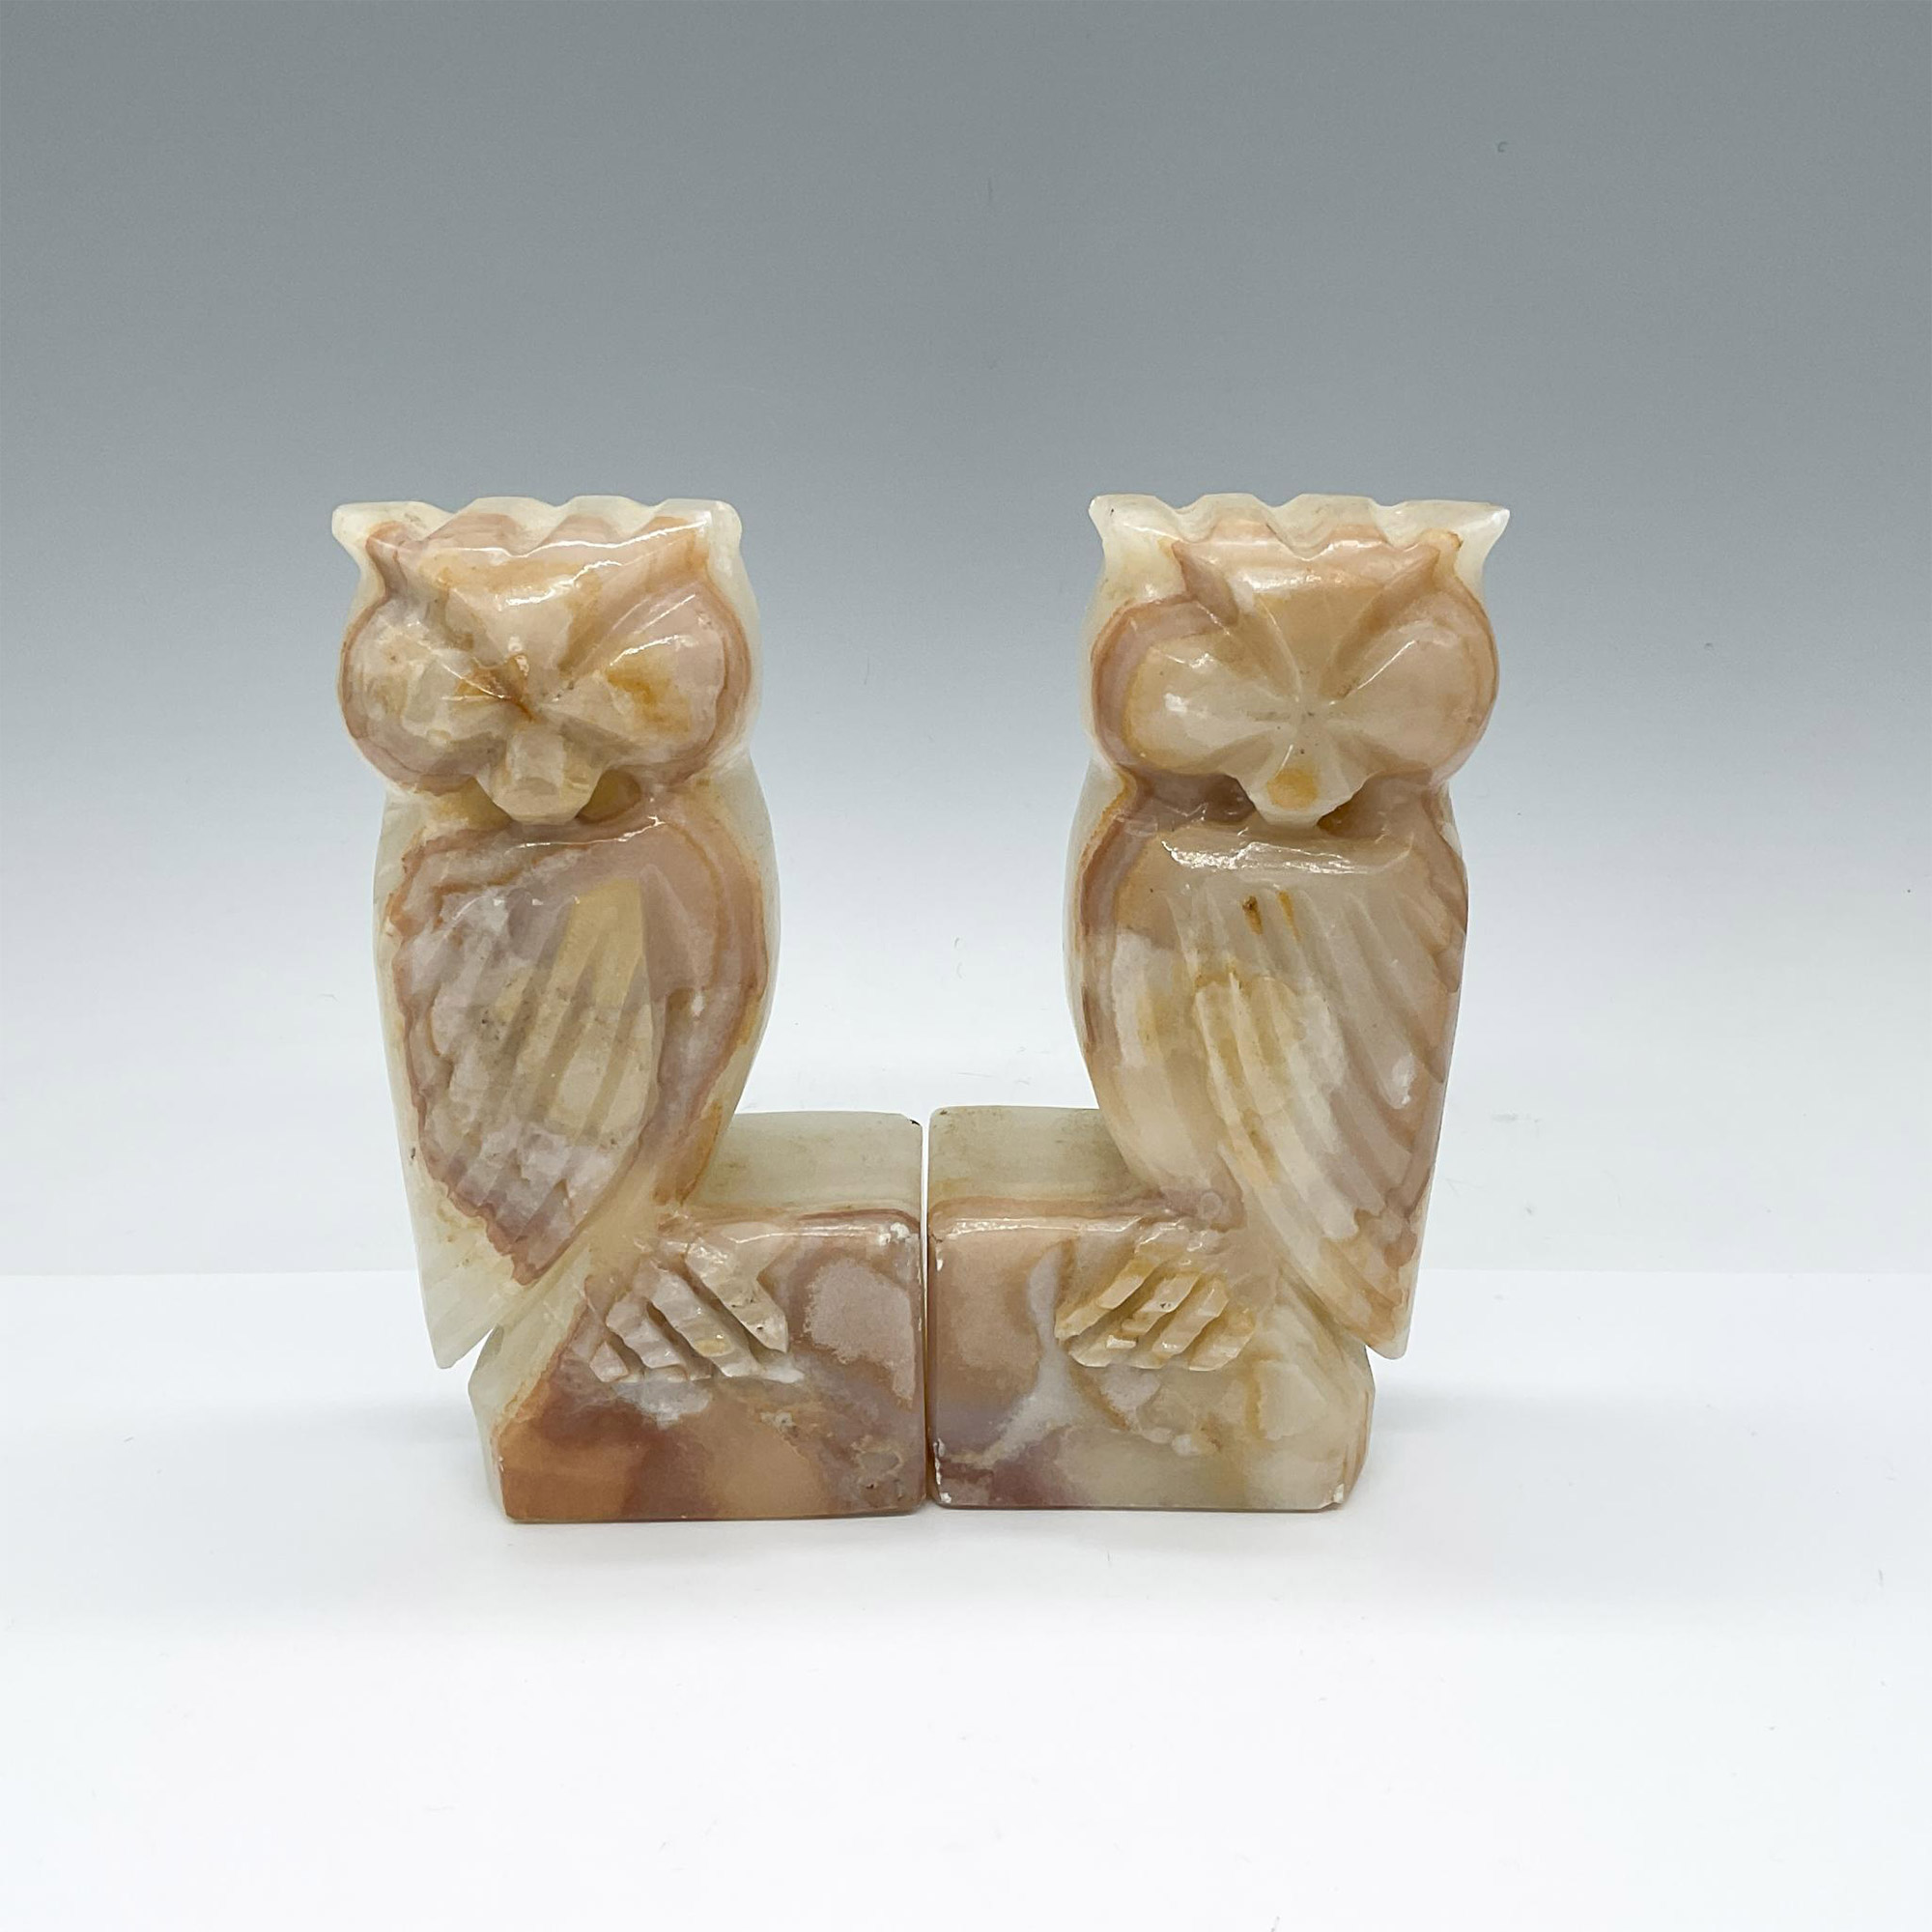 Pair of Vintage Stone Carved Owl Bookends